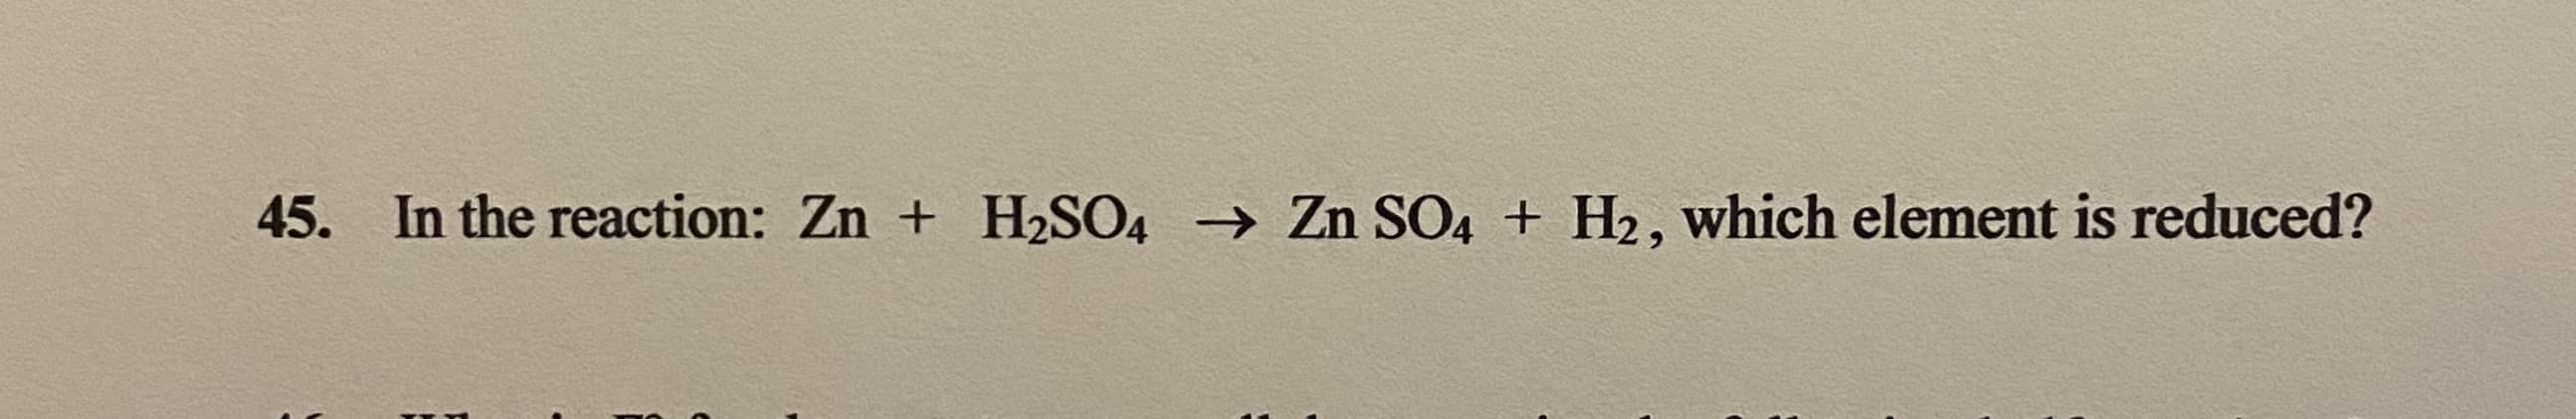 45. In the reaction: Zn + H2SO4 → Zn SO4 + H2, which element is reduced?
